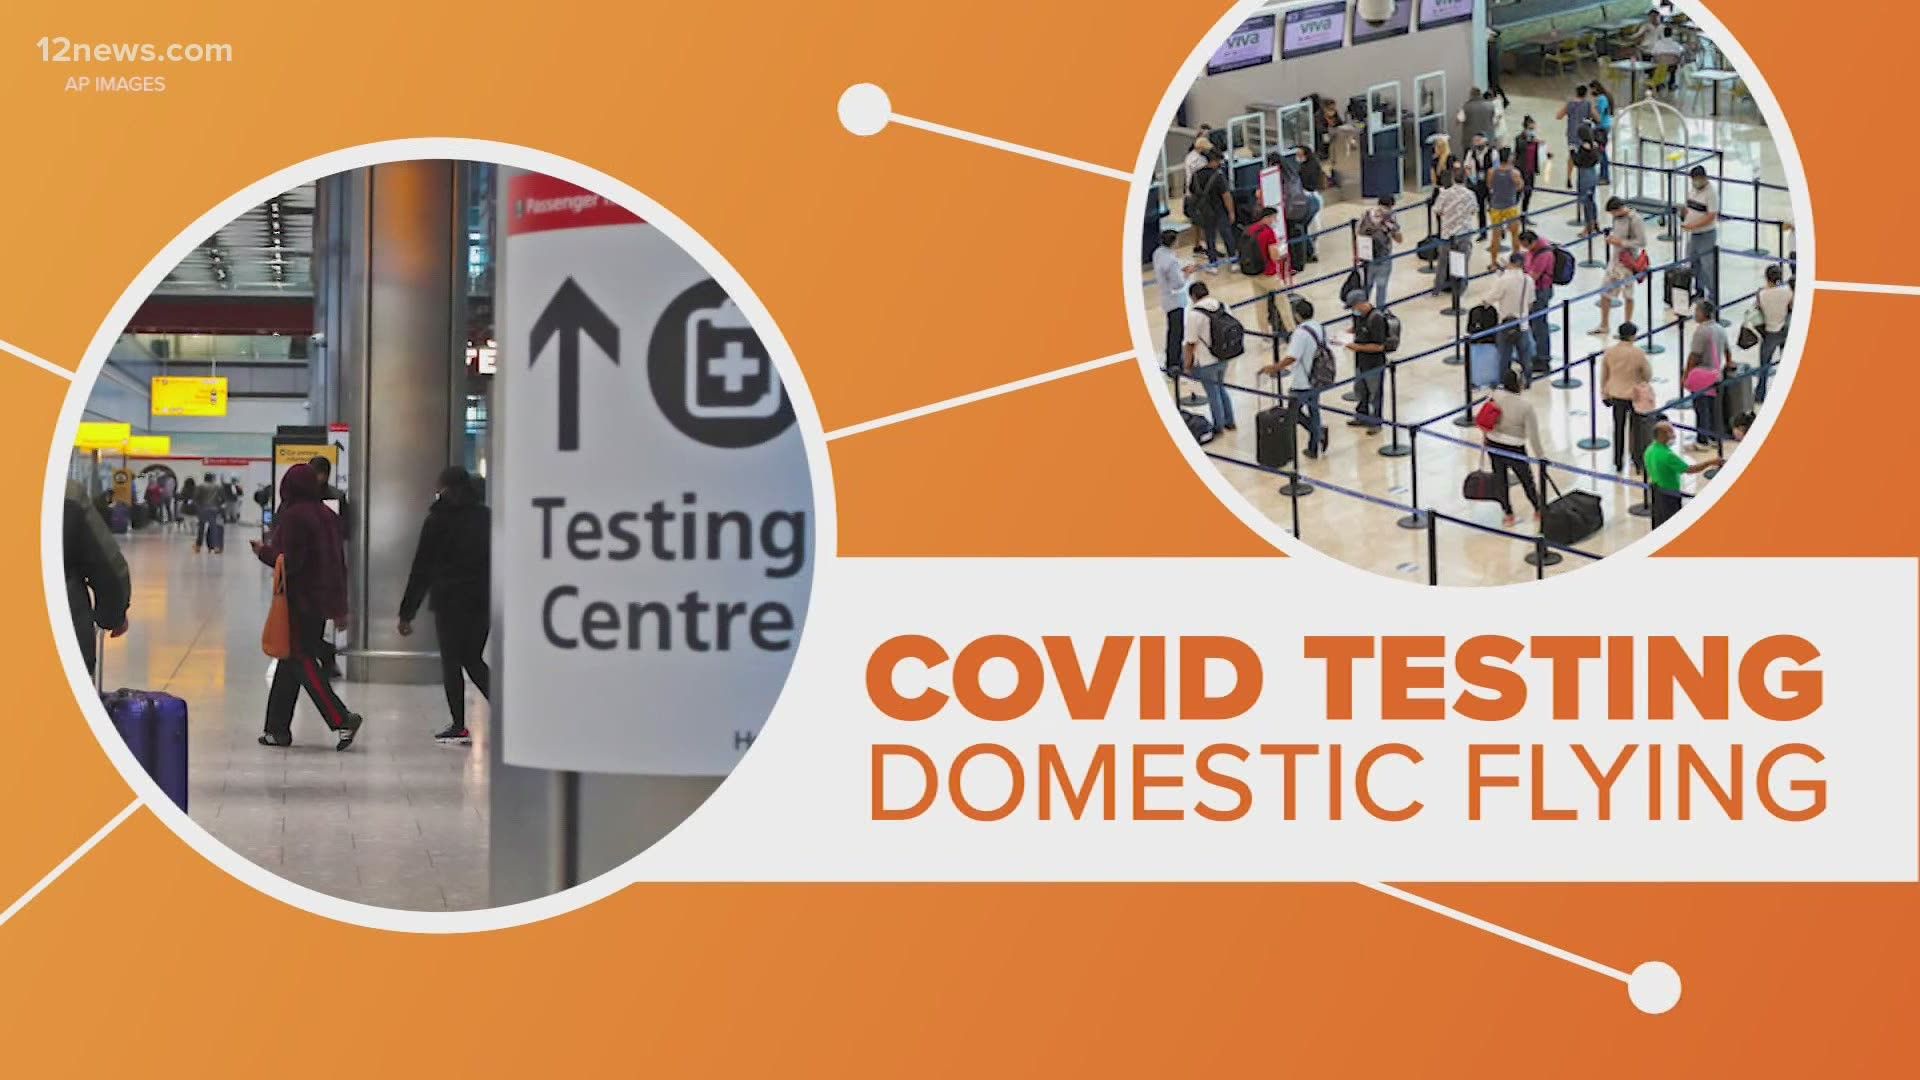 Will you soon have to get a negative COVID-19 test before you fly anywhere in the United States? We connect the dots for the answer.